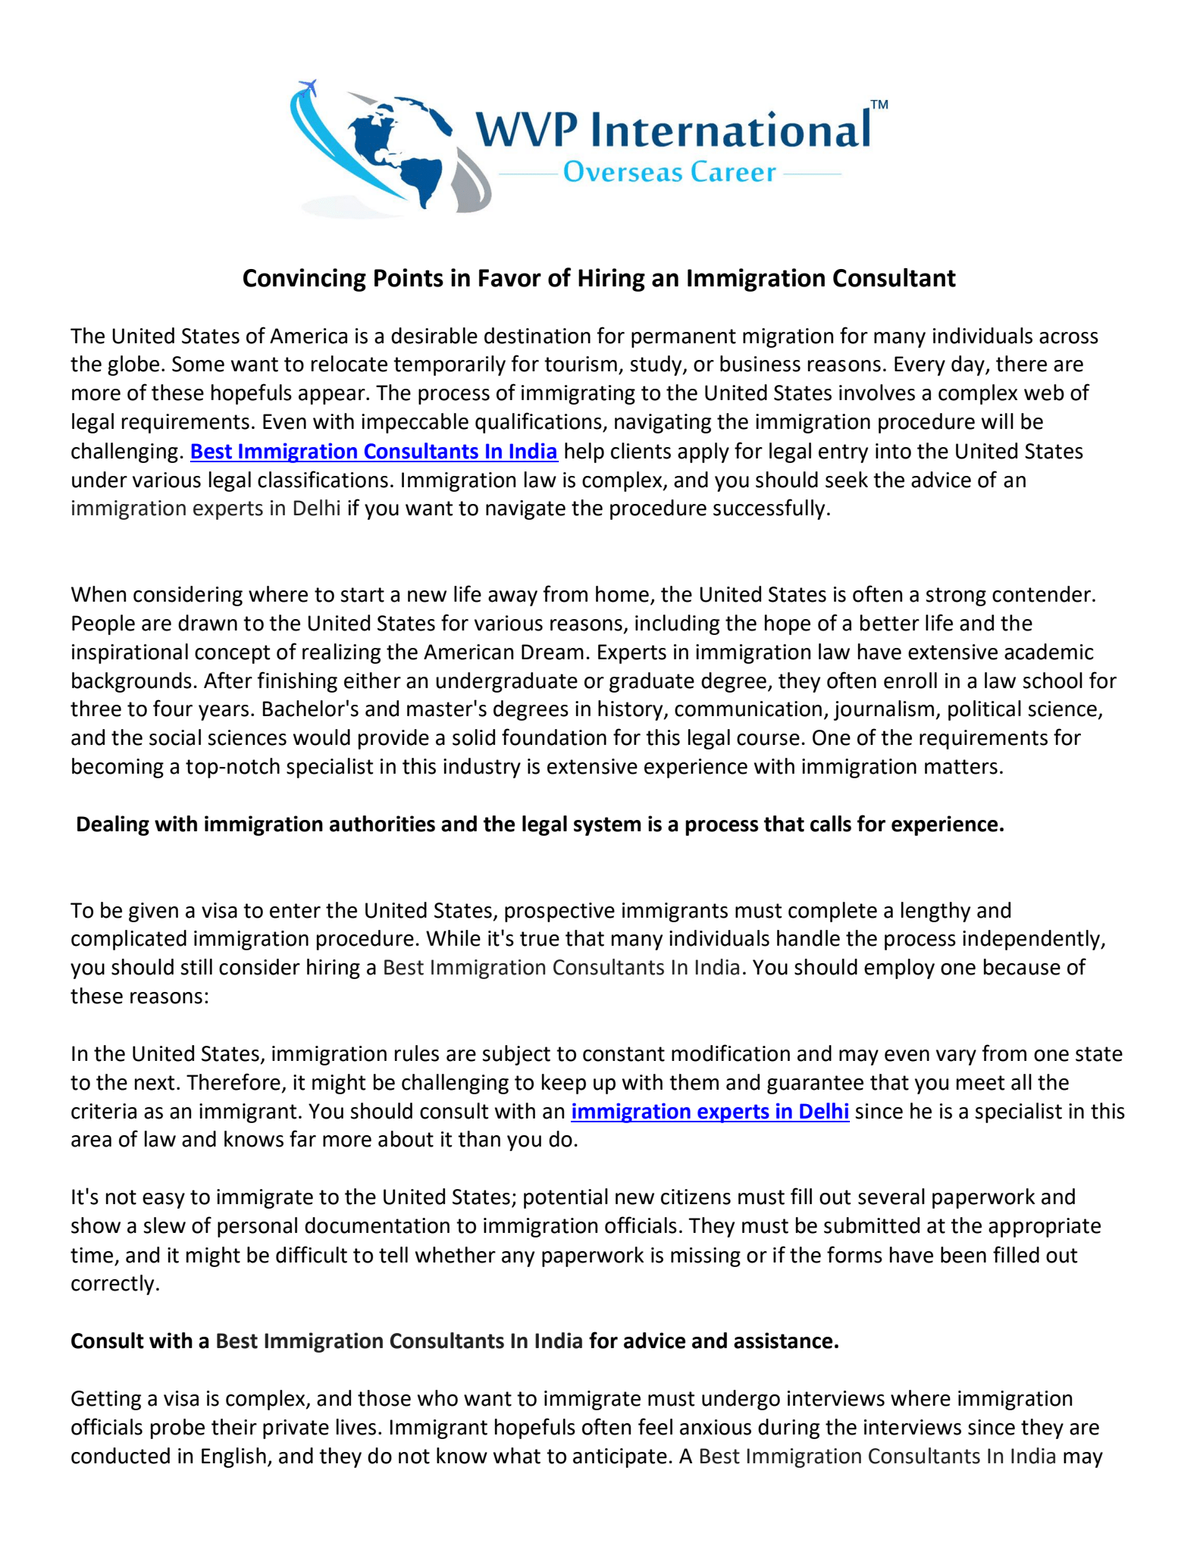 Dropbox - Convincing Points in Favor of Hiring an Immigration Consultant (1).pdf - Simplify your life